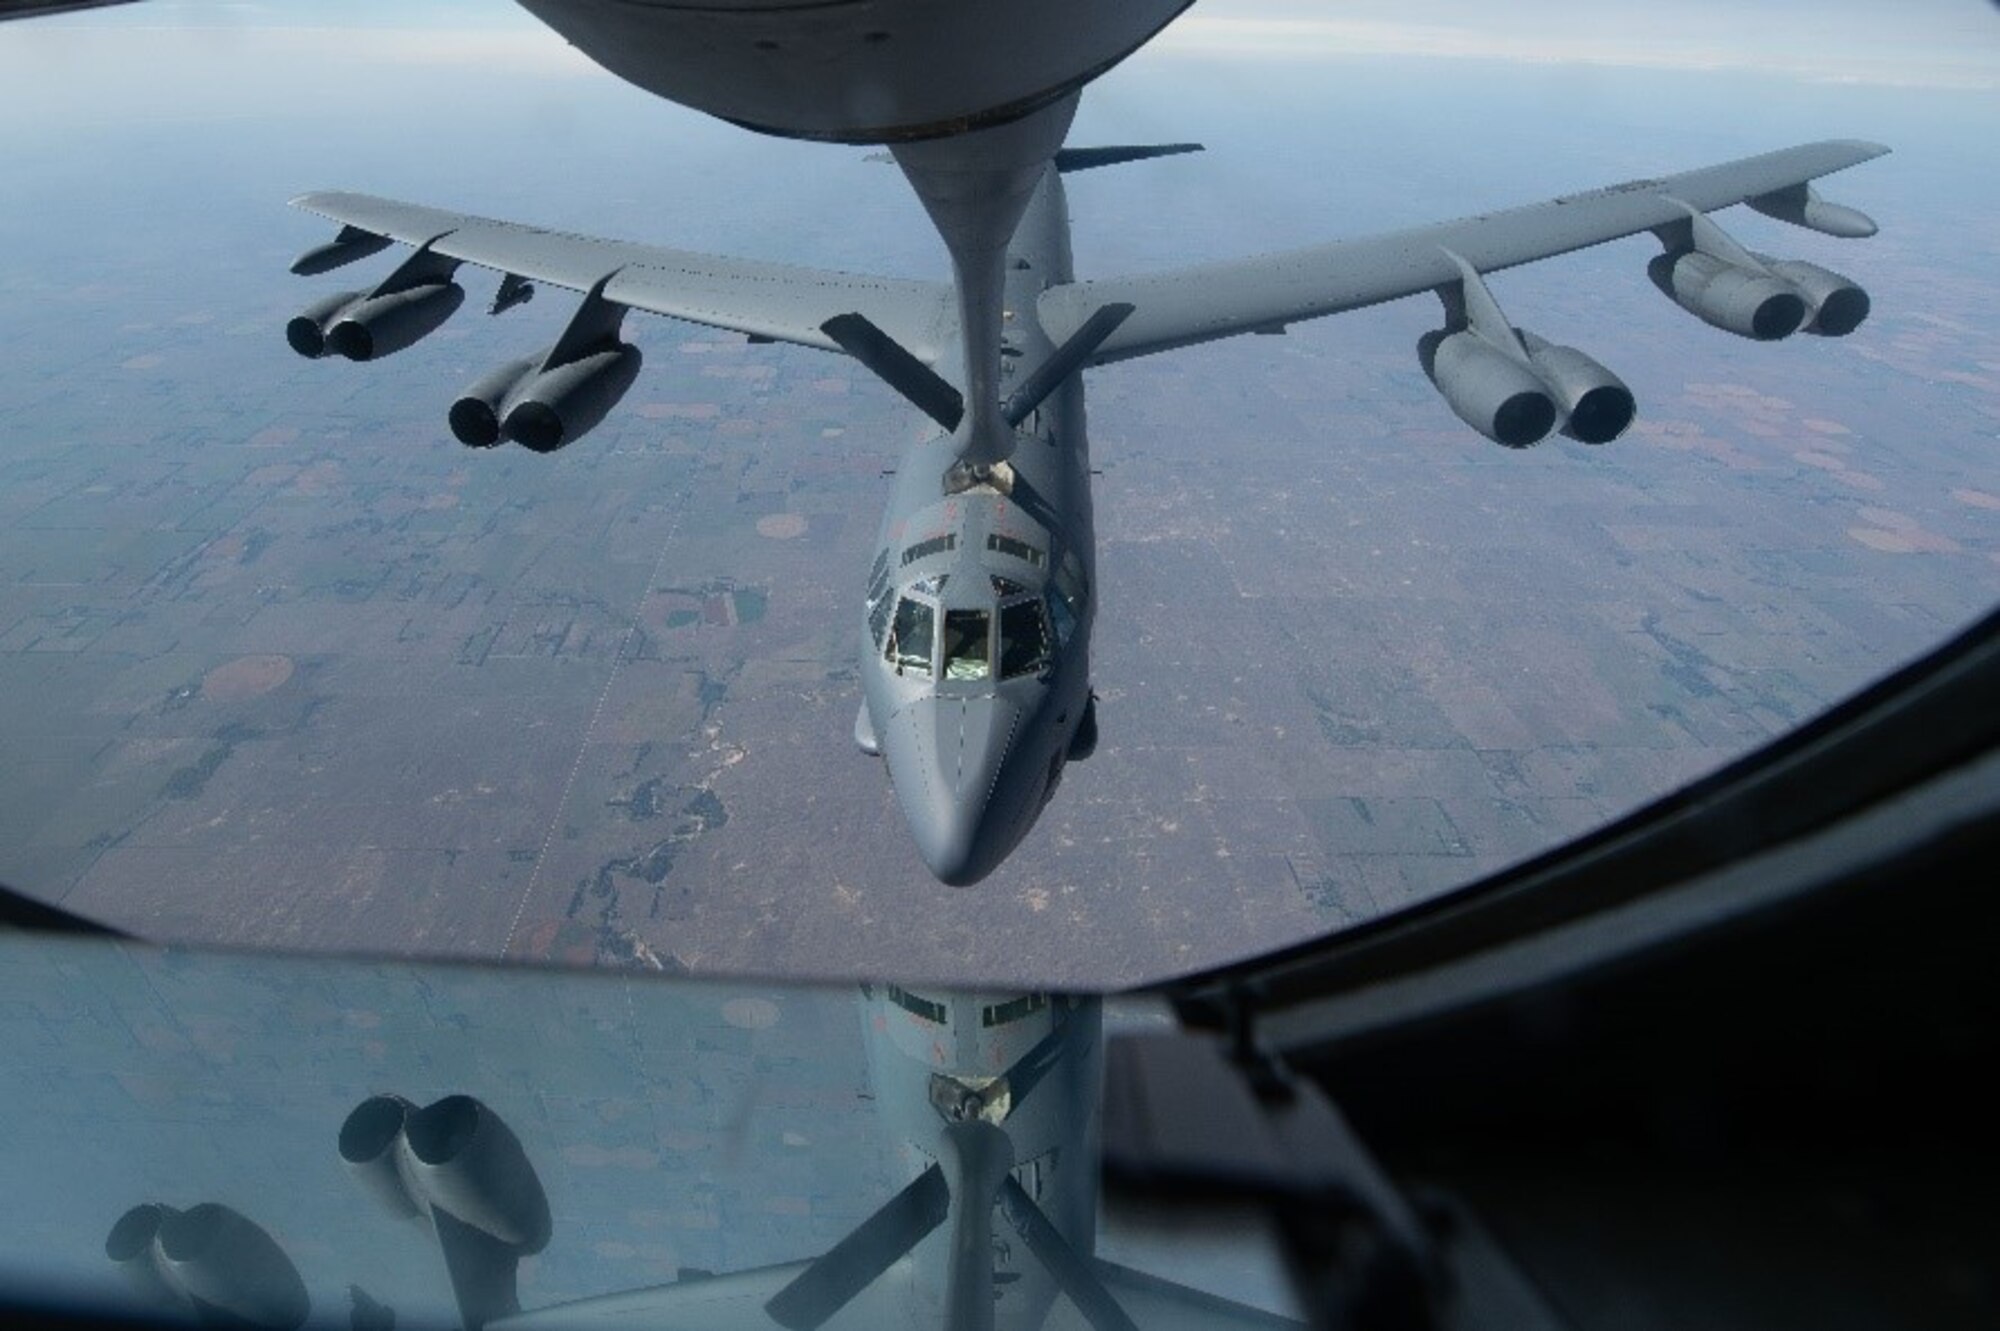 A U.S. Air Force KC-135 Stratotanker from Fairchild Air Force Base refuels a B-52 Stratofortess from Minot Air Force Base, departing McGhee Tyson Air National Guard Base, for a 72-hour endurance mission Oct. 6, 2022. Team Fairchild continues to set new standards for global reach and the enduring tanker force. (U.S. Air Force photo by Airman 1st Class Jenna A. Bond)